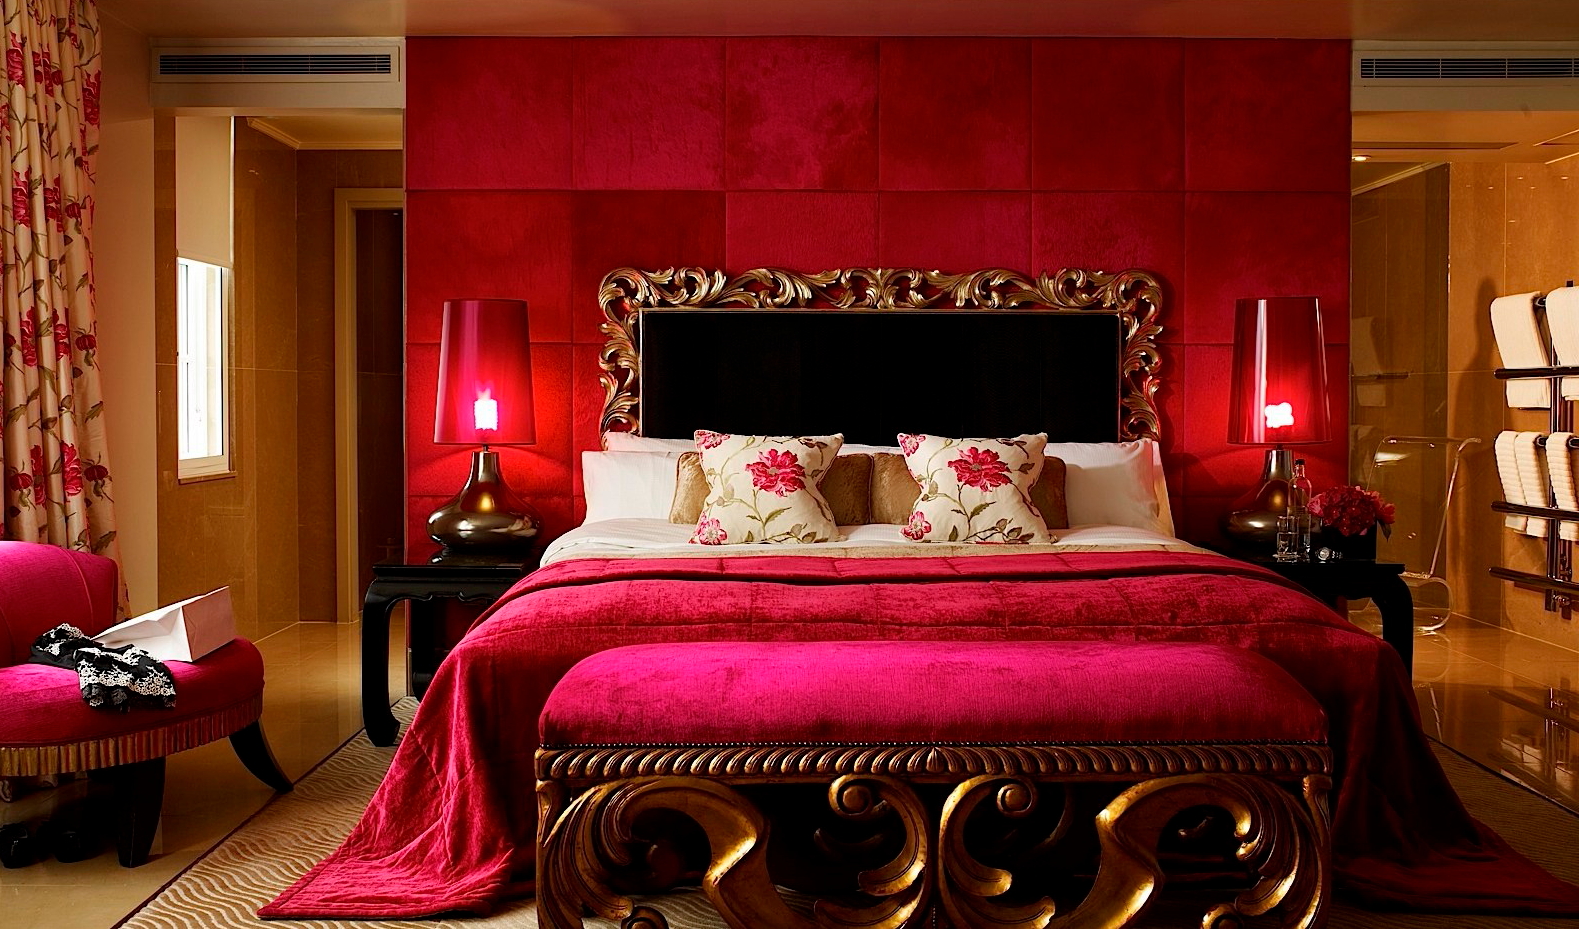 Schiaparelli Suite Bedroom at The May Fair London. Click to enlarge.